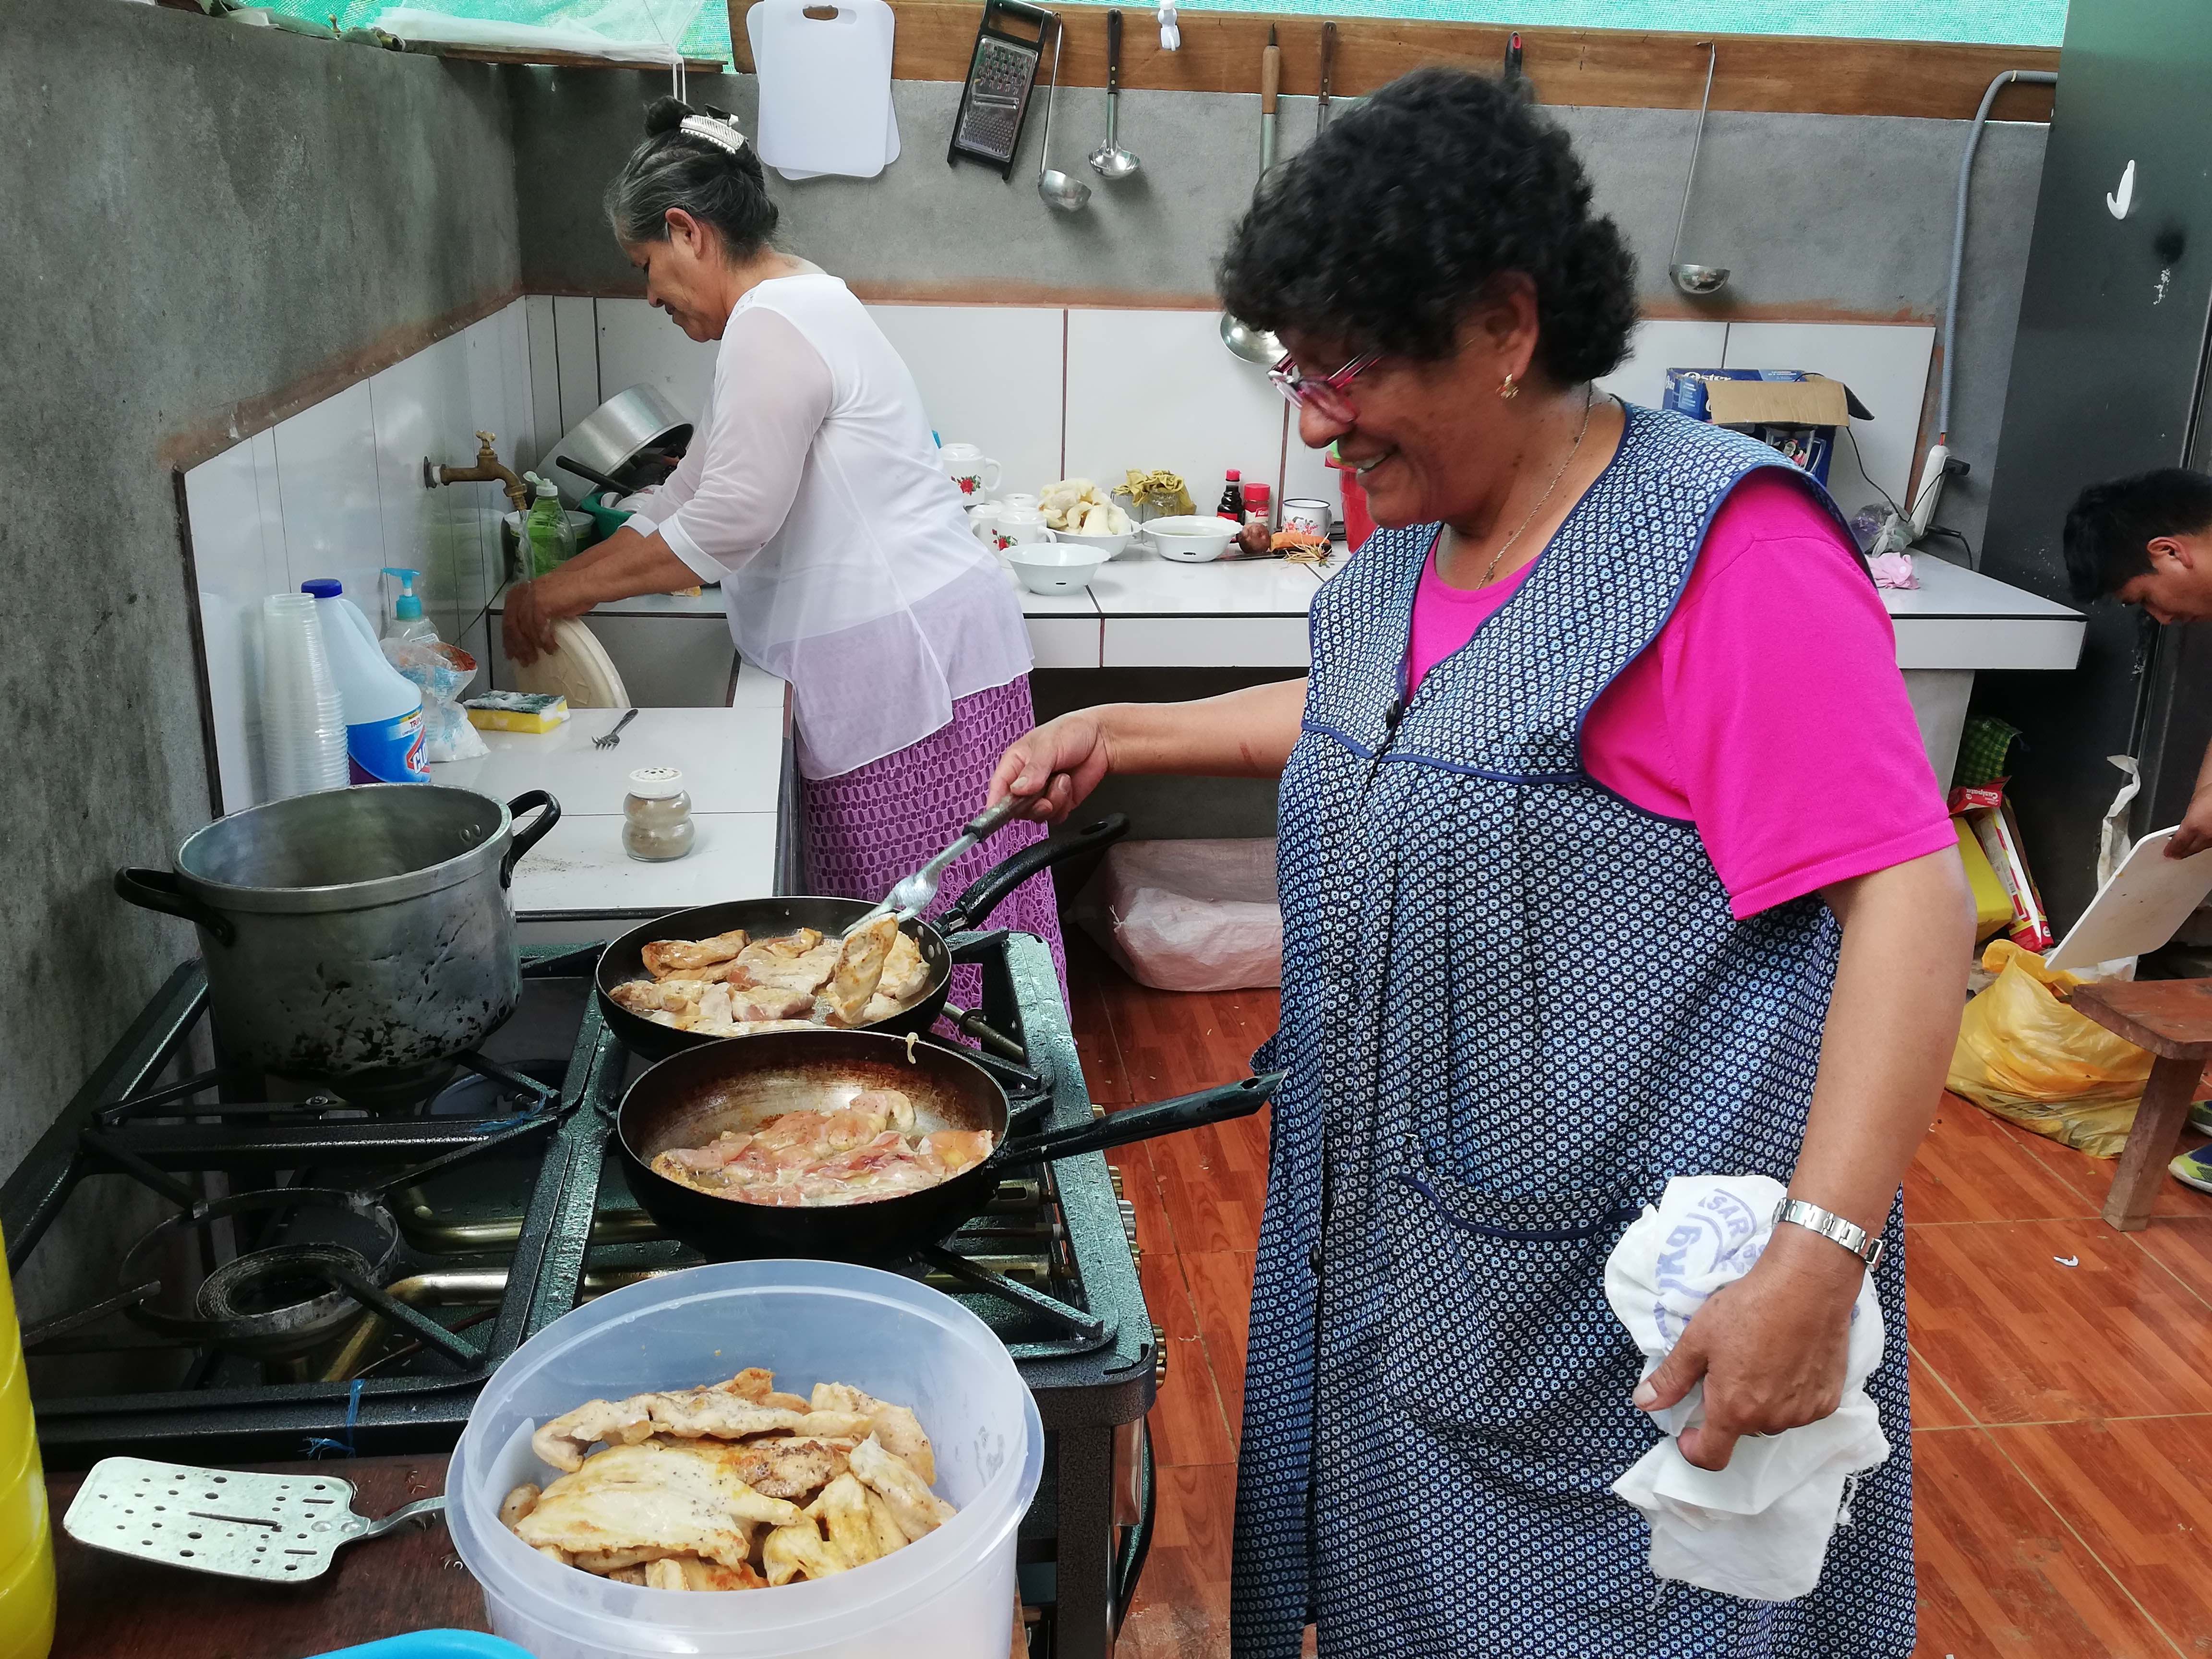 Jesusa Kitchen – Jesusa enjoys cooking in the kitchen, one of her many ministries.